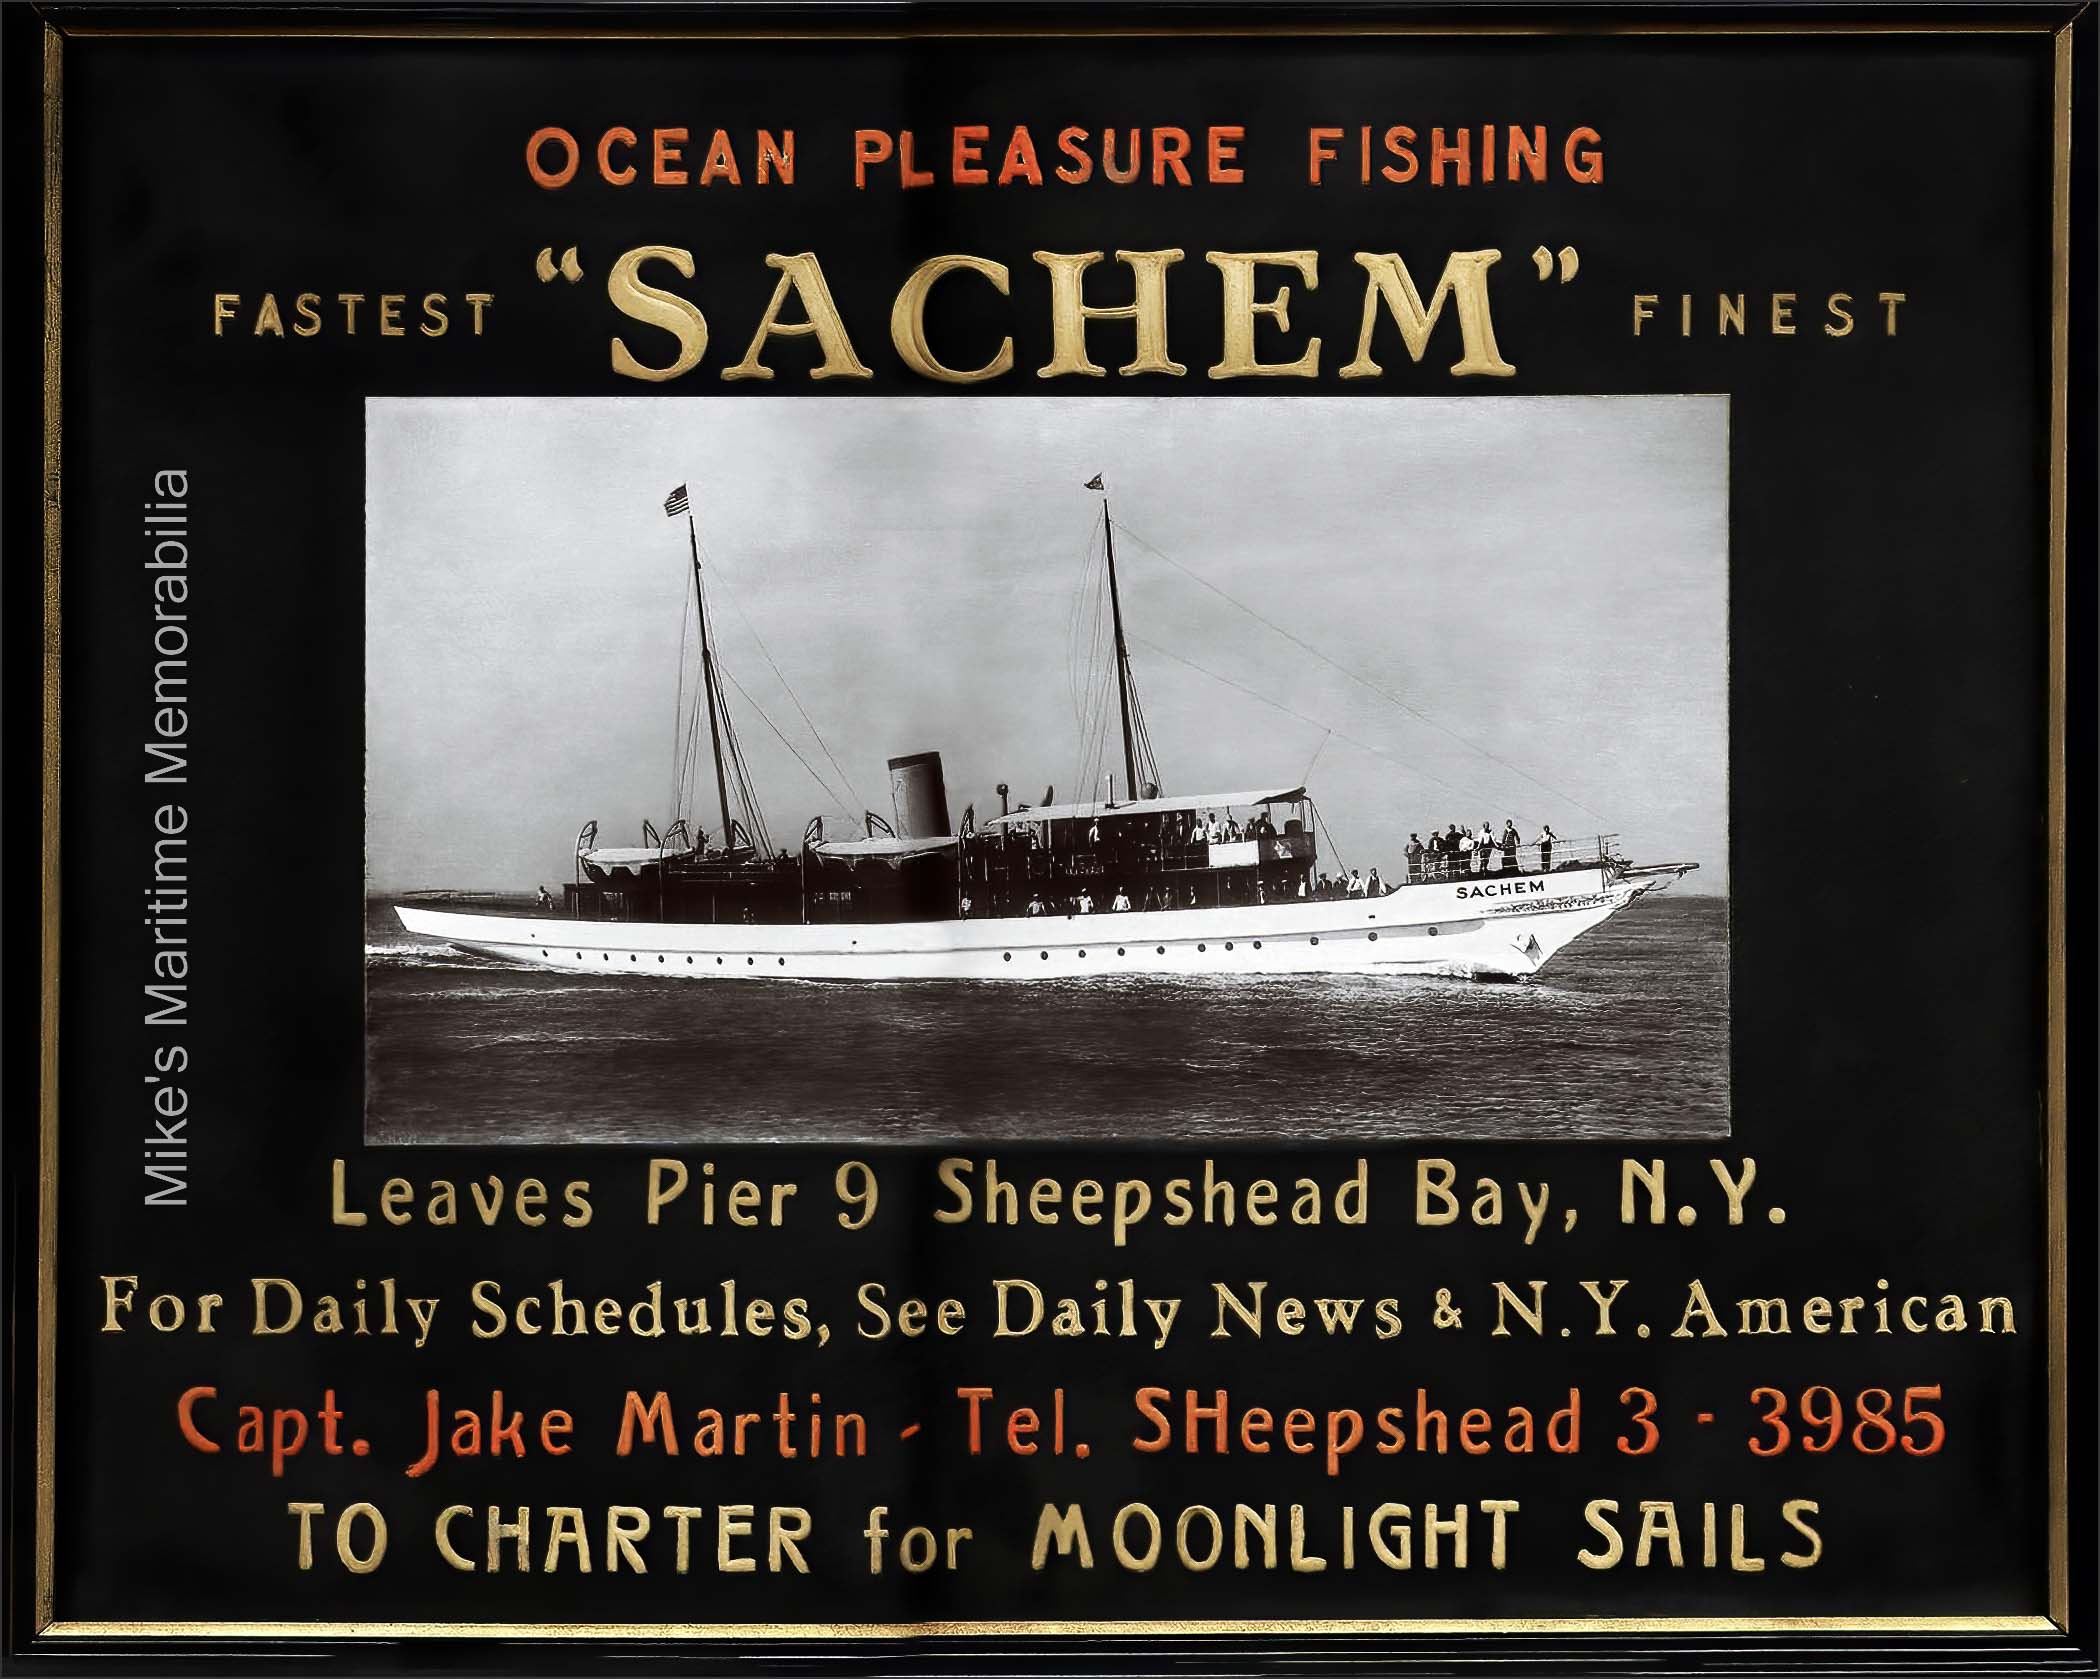 SACHEM Advertising Sign, Brooklyn, NY – 1934 Advertising signs like this one for Captain Jacob "Jake" Martin's party fishing boat "SACHEM" from Sheepshead Bay, Brooklyn, NY promoted the "Queen of the Fleet" at sporting goods stores and other local businesses circa 1934. The "SACHEM" was built in 1902 as a luxury yacht and during her long career, was appropriated by the government for service as a patrol yacht in World War I and in World War II, sailed as a party fishing boat during the great depression, and was a member of New York City's Circle Line sightseeing fleet until 1977.